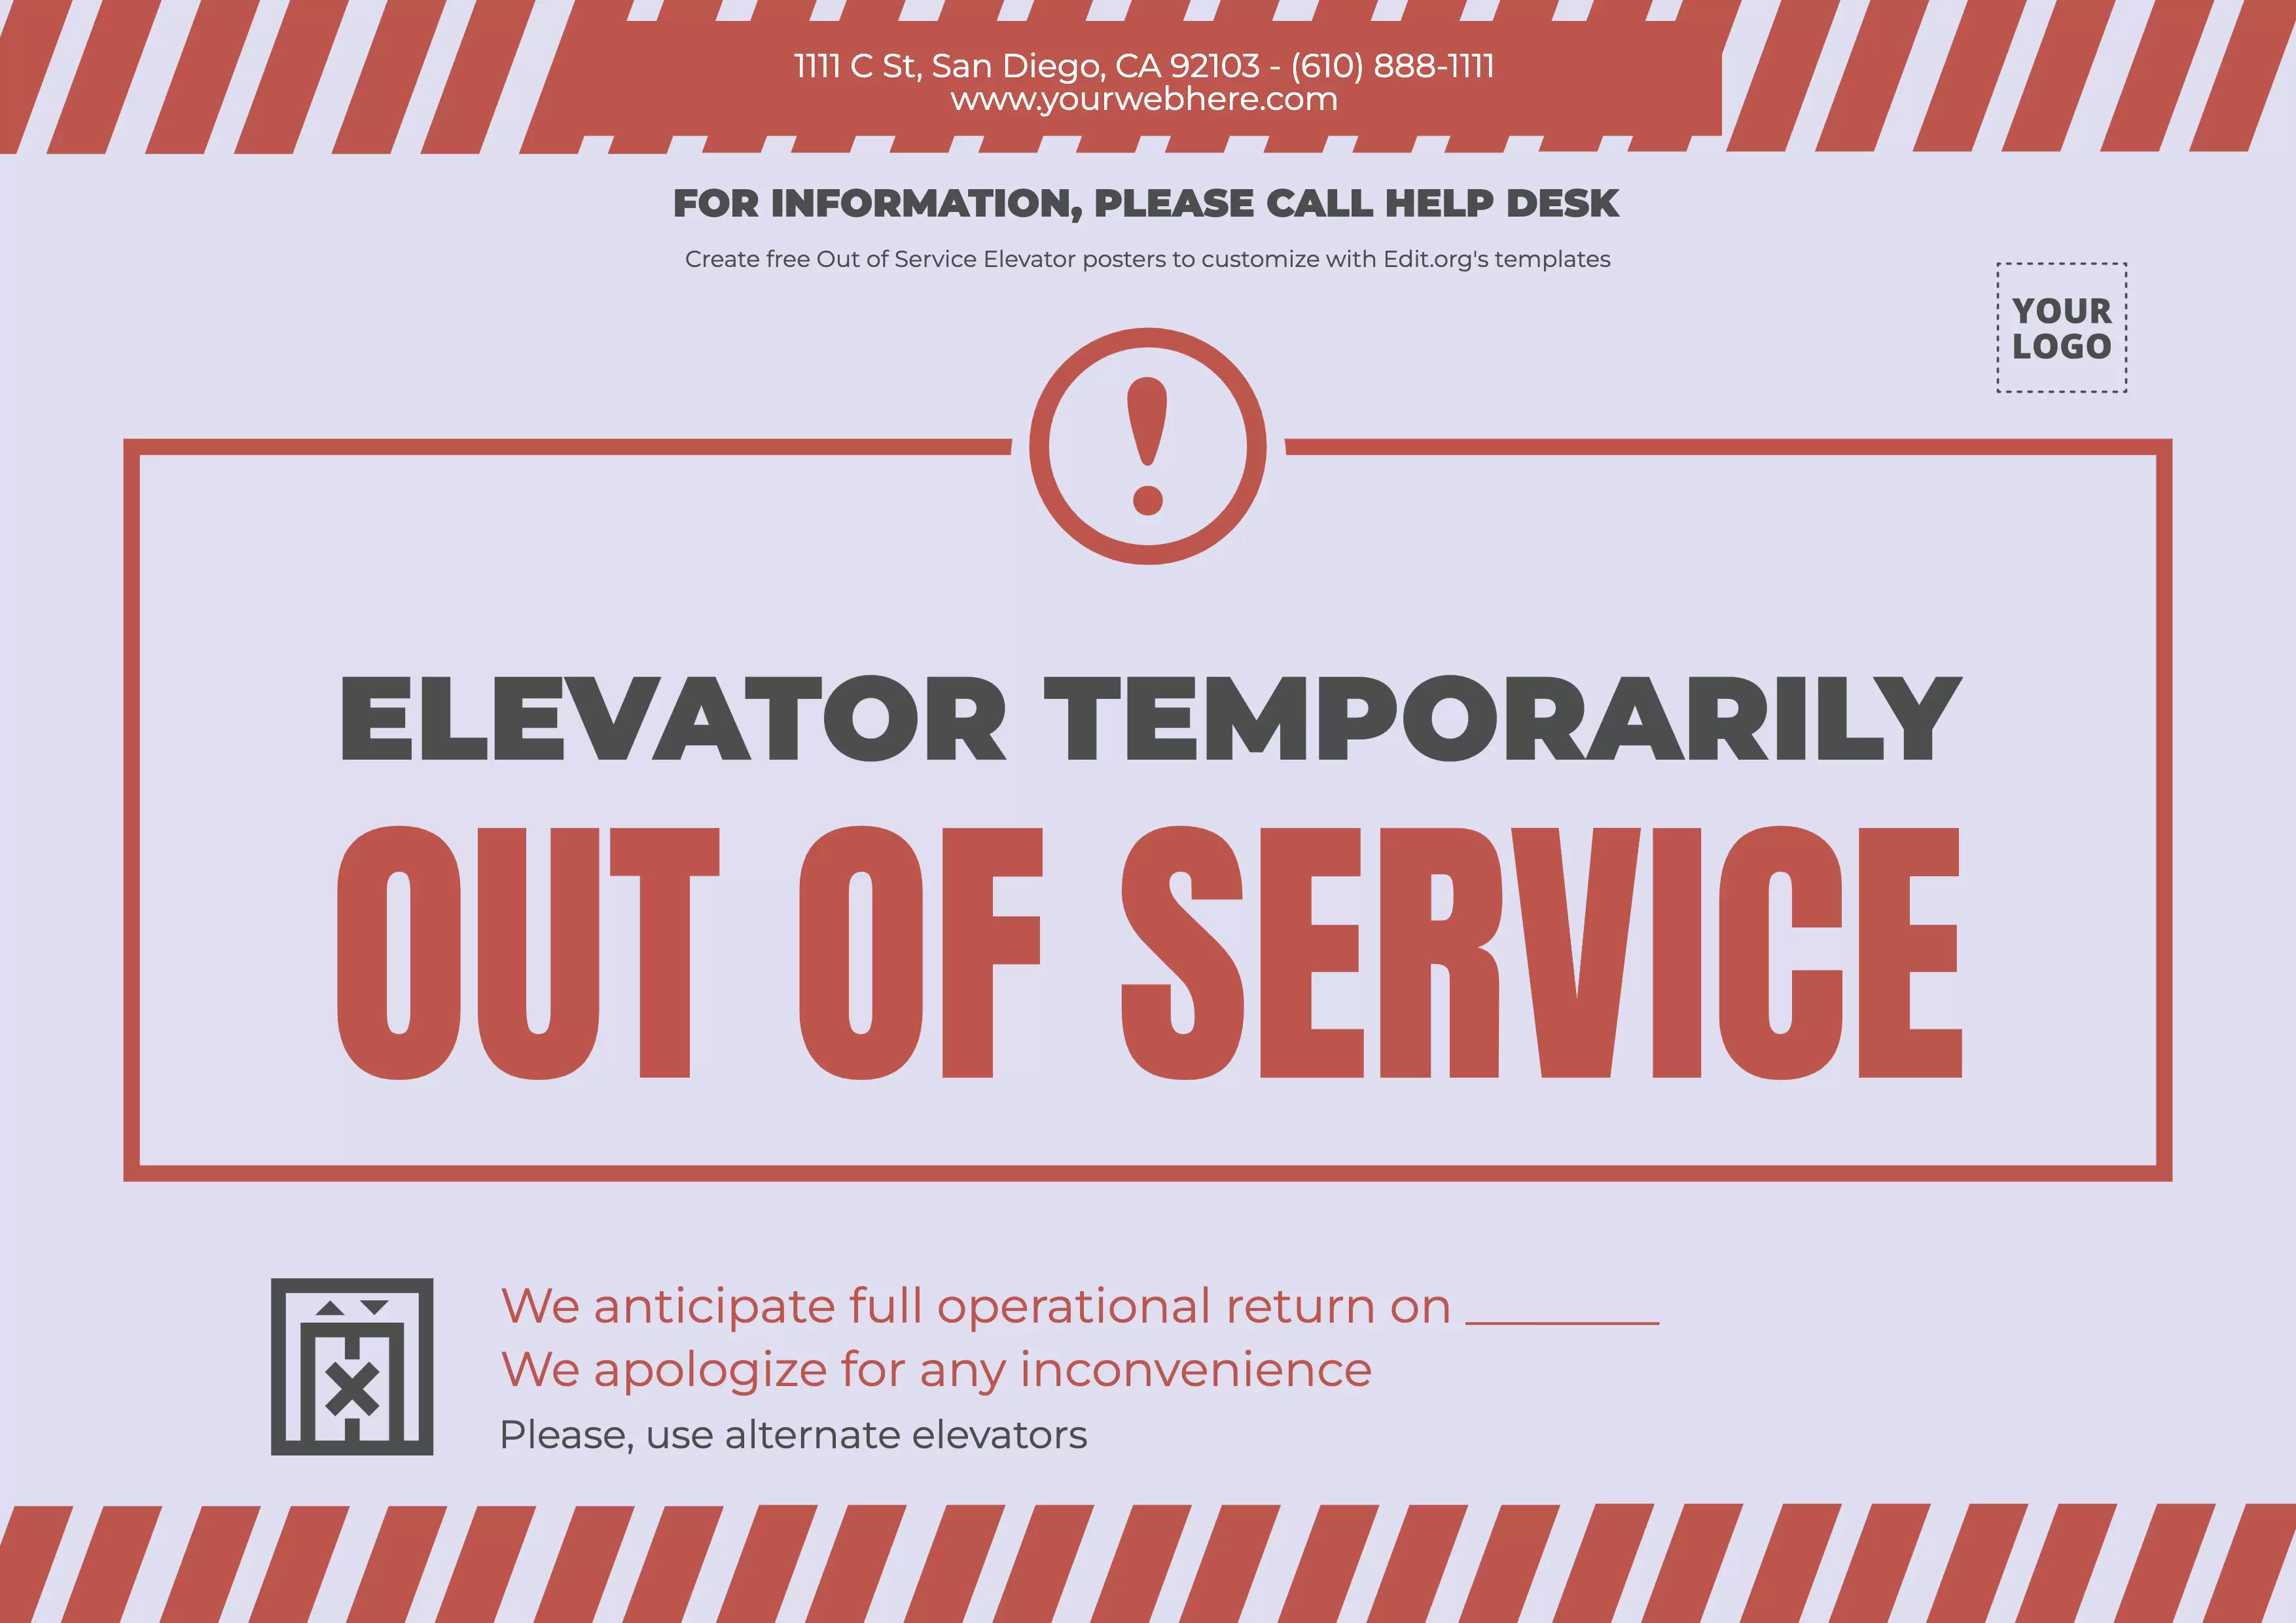 Elevator Out of Service sign printable free